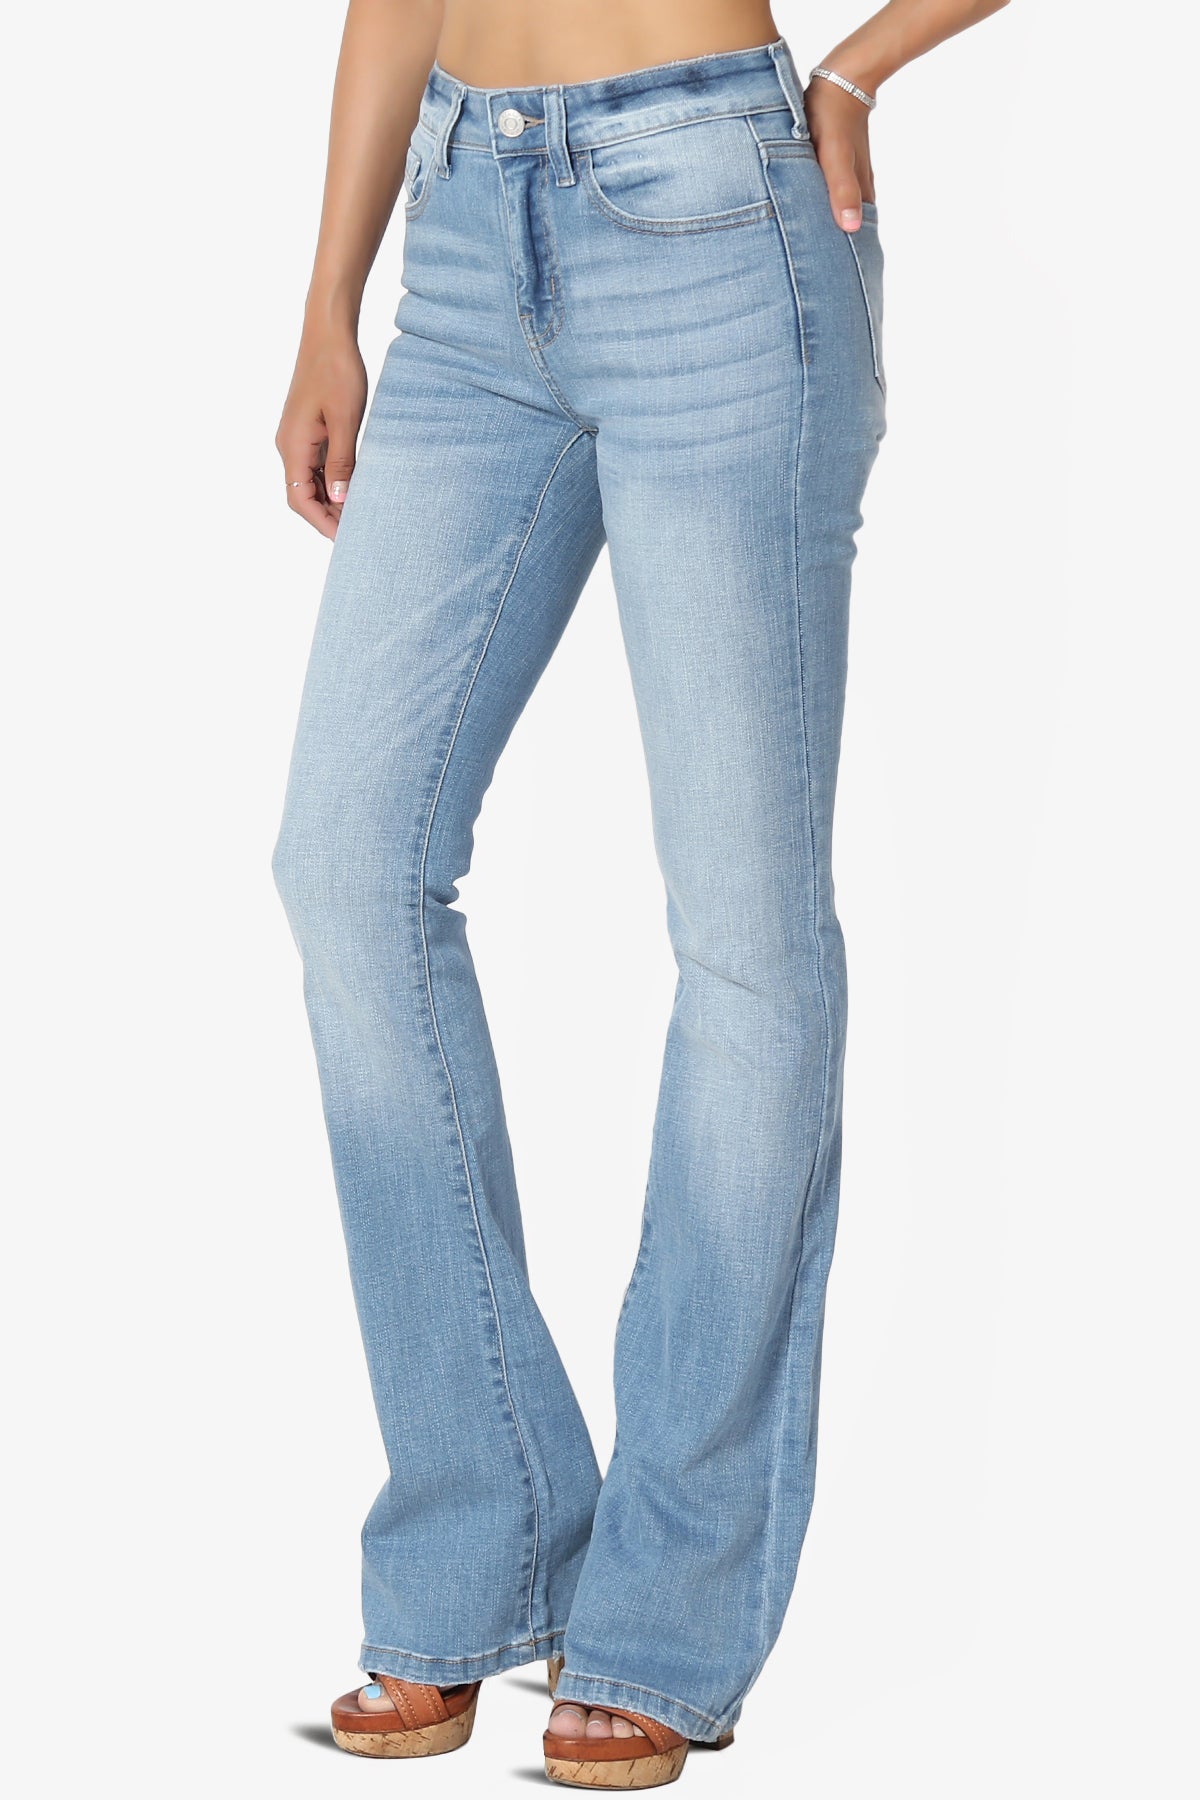 Clyde Washed Mid Rise Boot Cut Jeans in Light